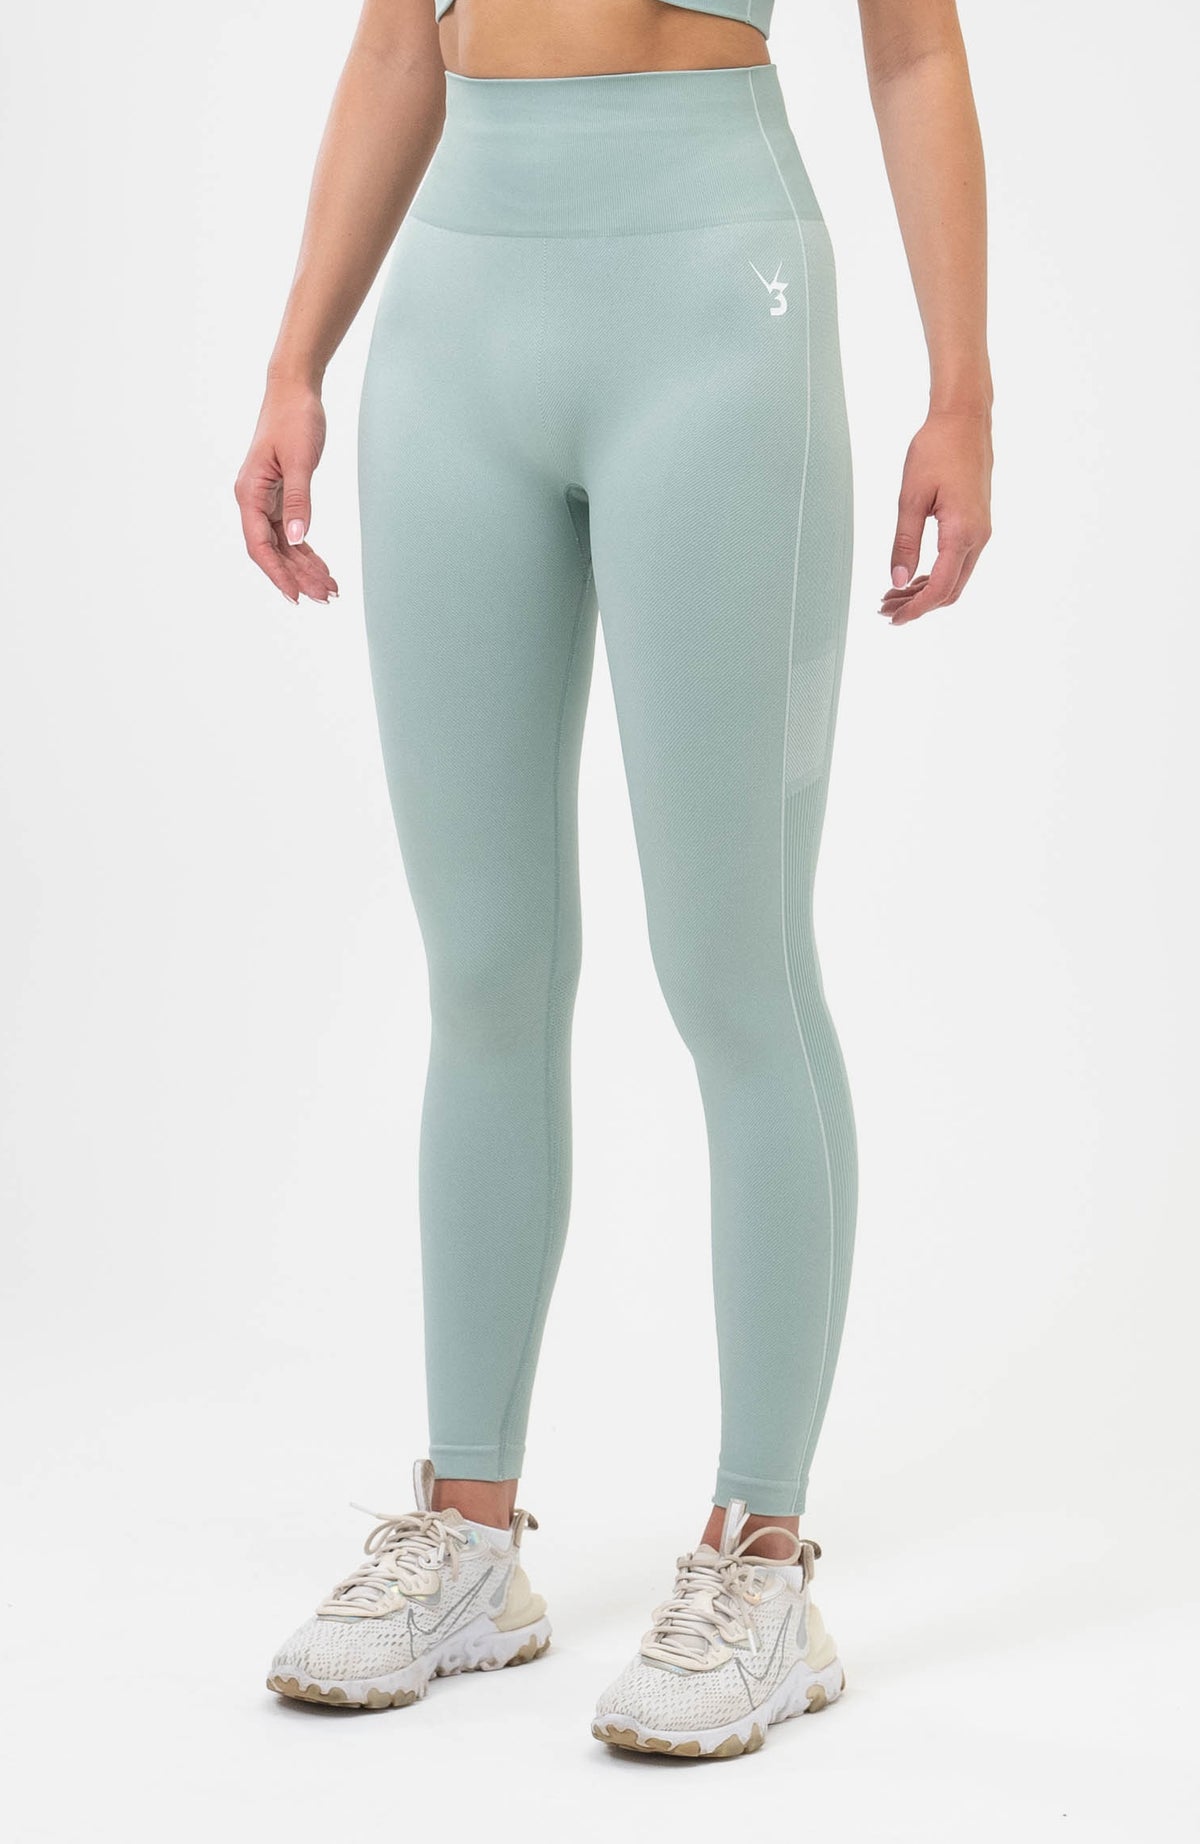 Shop Unity Seamless Leggings - Mint V3 Apparel and Save Big! Shop for the  best items at amazing prices with excellent service